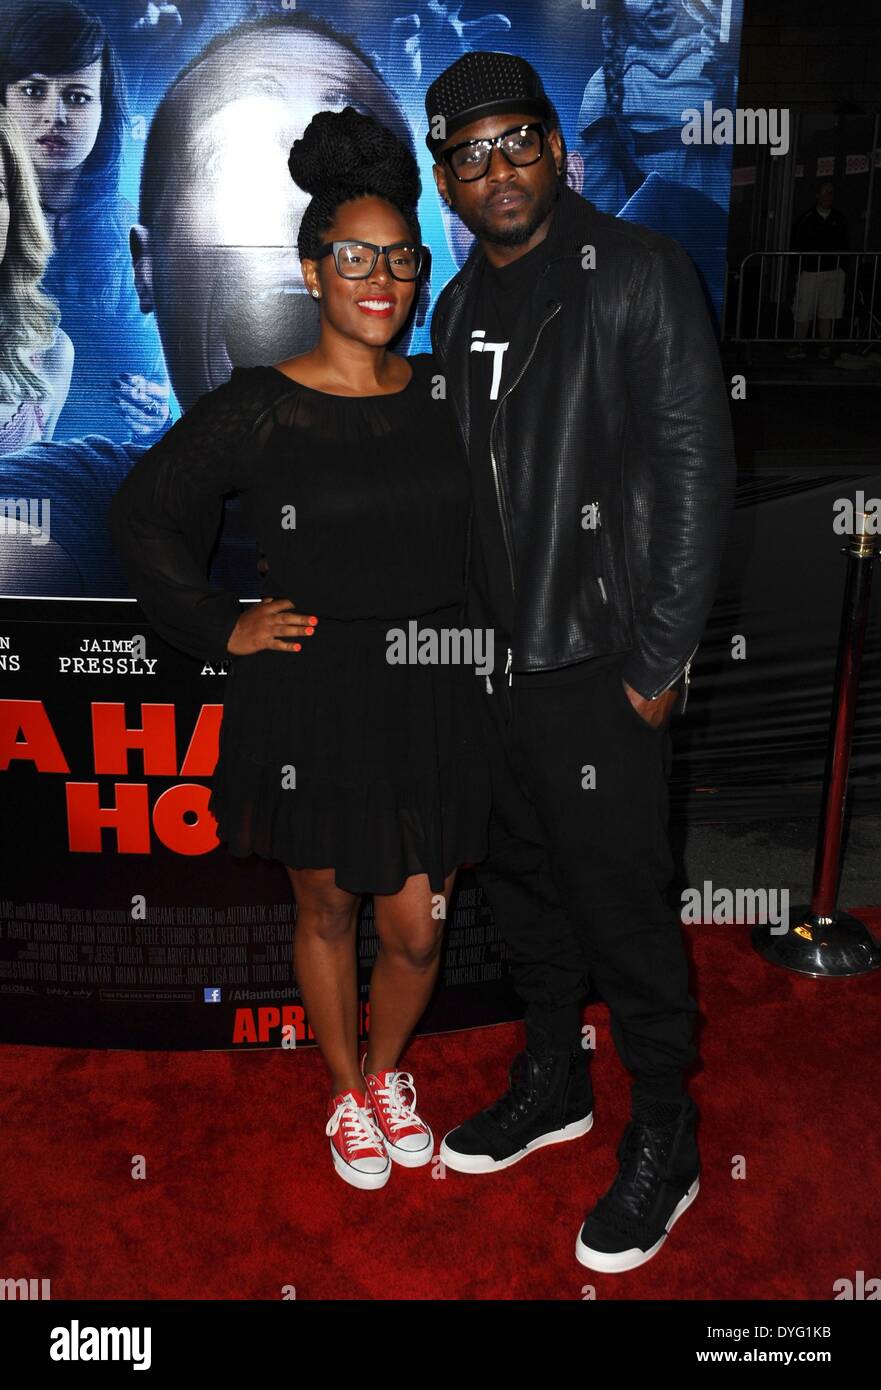 Los Angeles, CA, USA. 16th Apr, 2014. Omar Epps, Keisha Epps at arrivals for A HAUNTED HOUSE Premiere, Regal Cinemas LA Live, Los Angeles, CA April 16, 2014. Credit:  Dee Cercone/Everett Collection/Alamy Live News Stock Photo